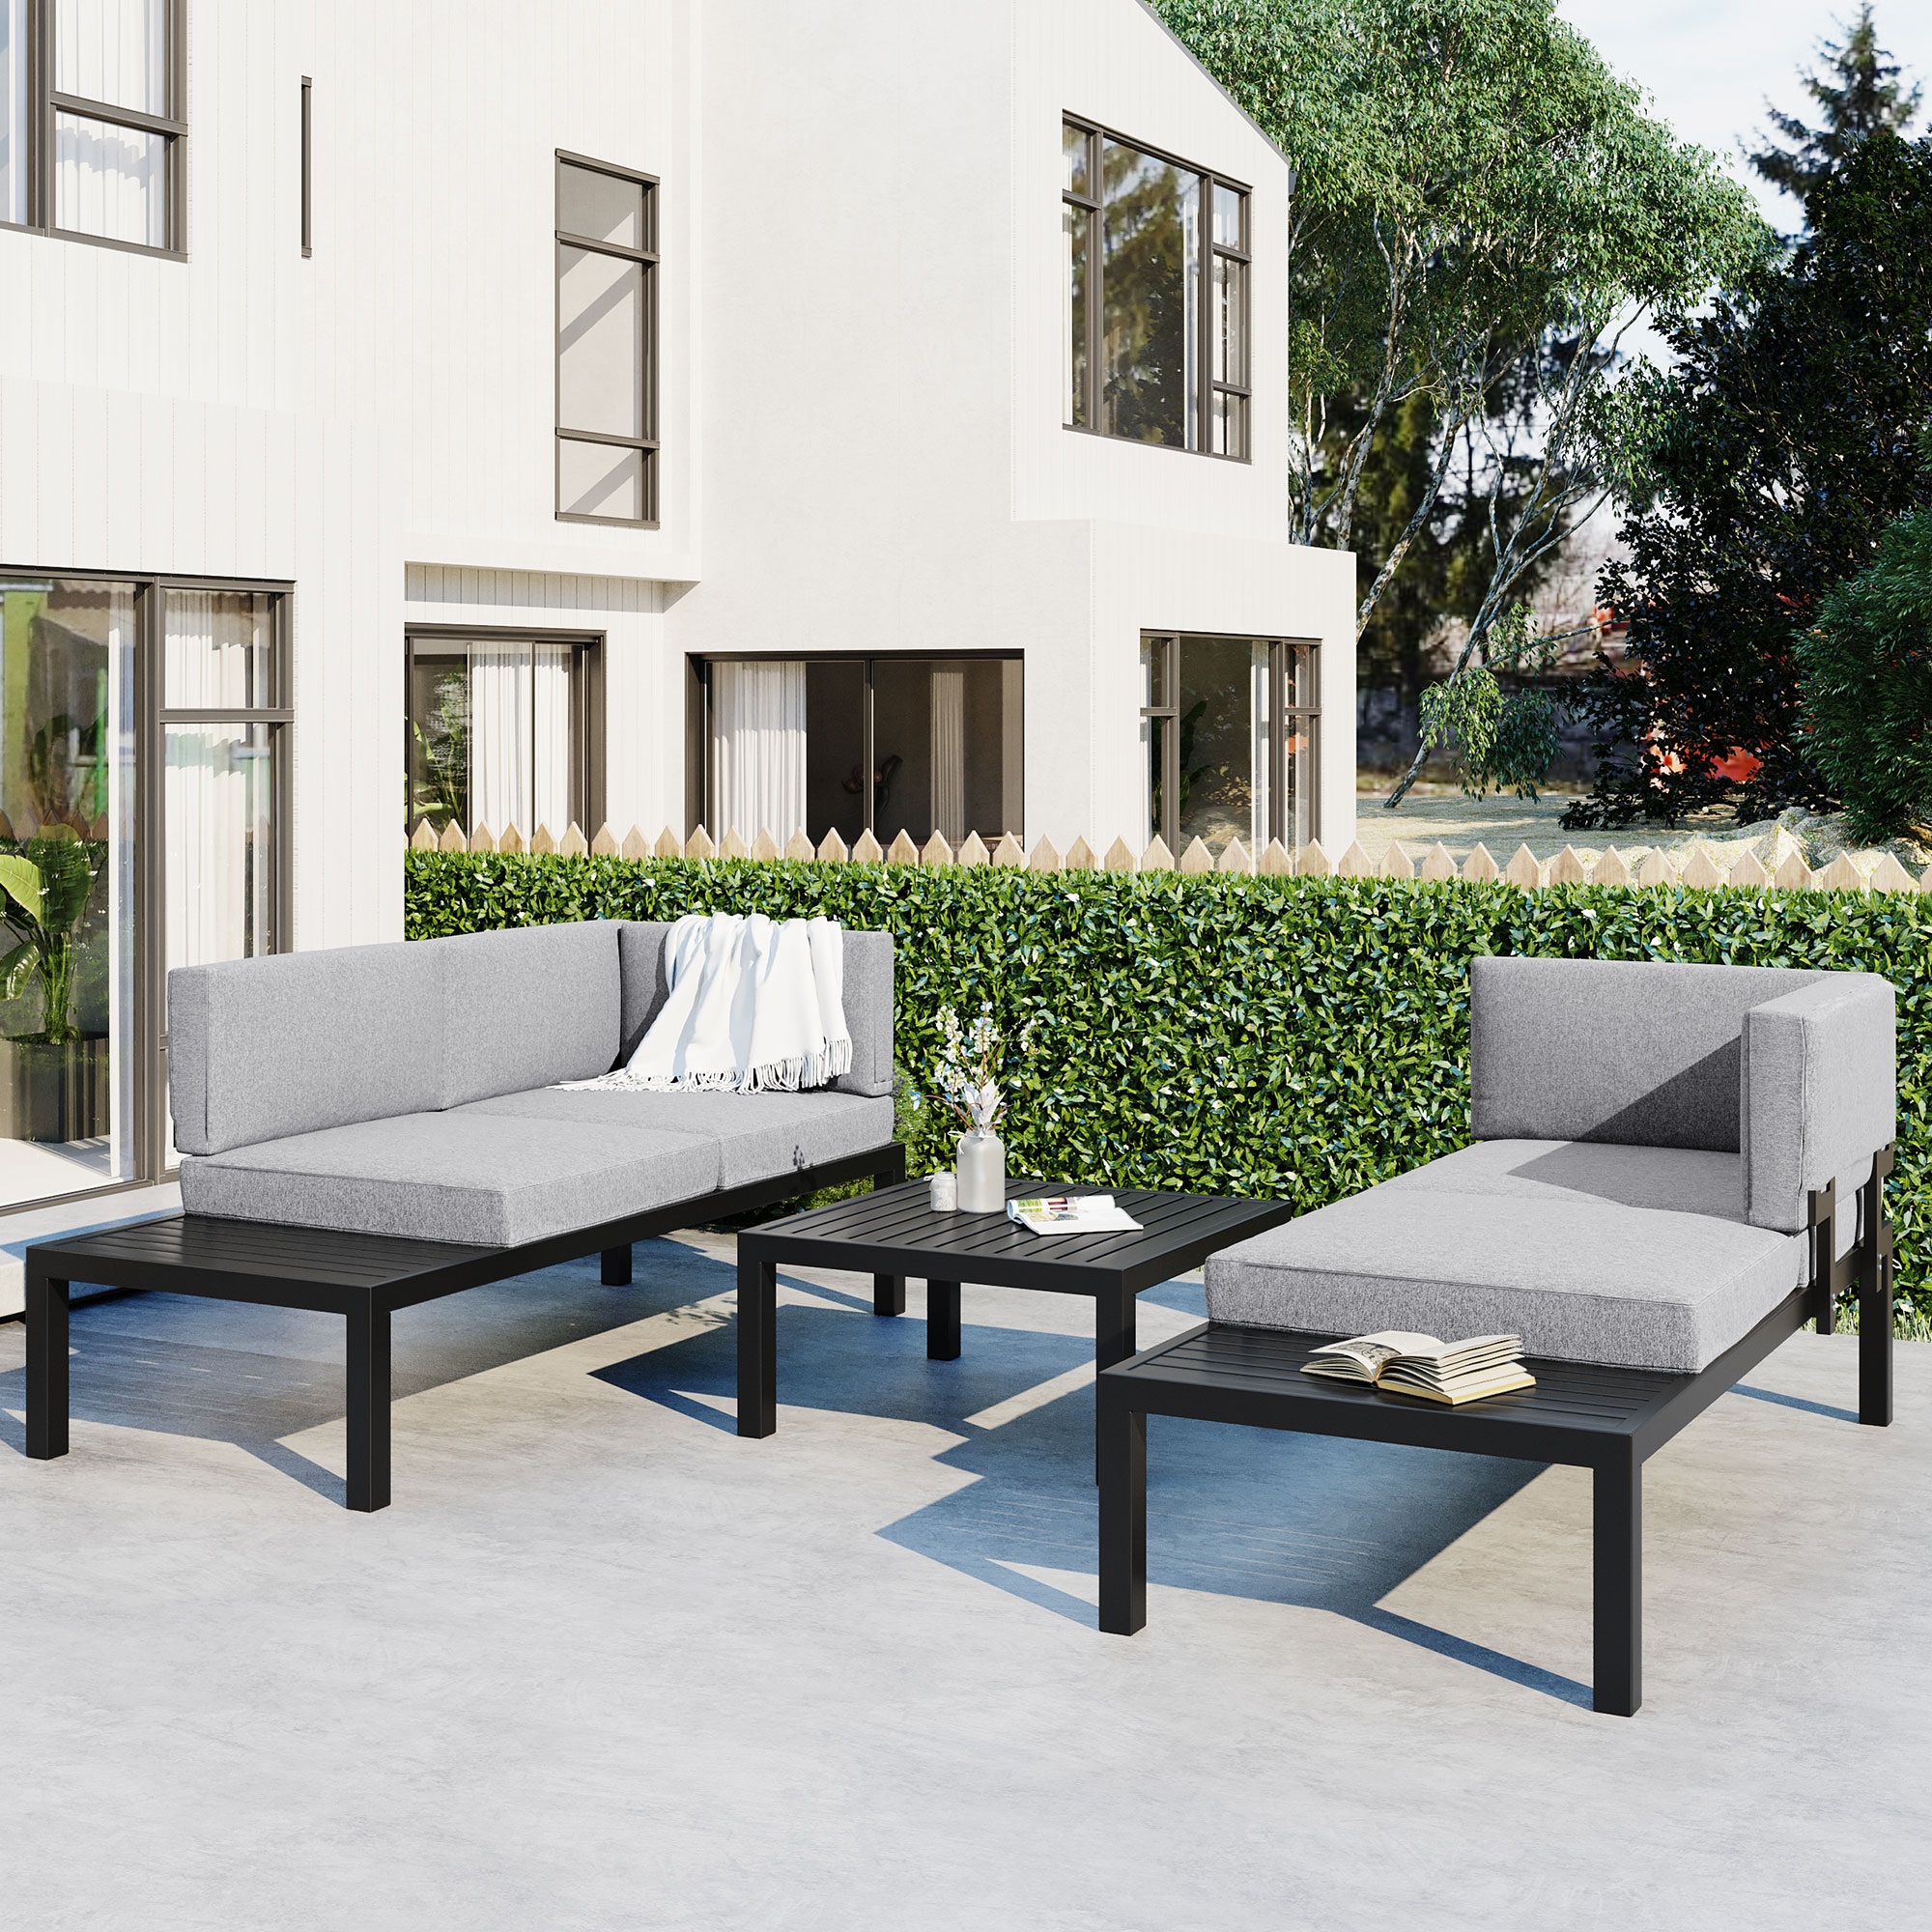 Mondawe Outdoor 3-piece Aluminum Alloy Sectional Sofa Set with End Table and Coffee Table Black Frame+Gray Cushion-Mondawe